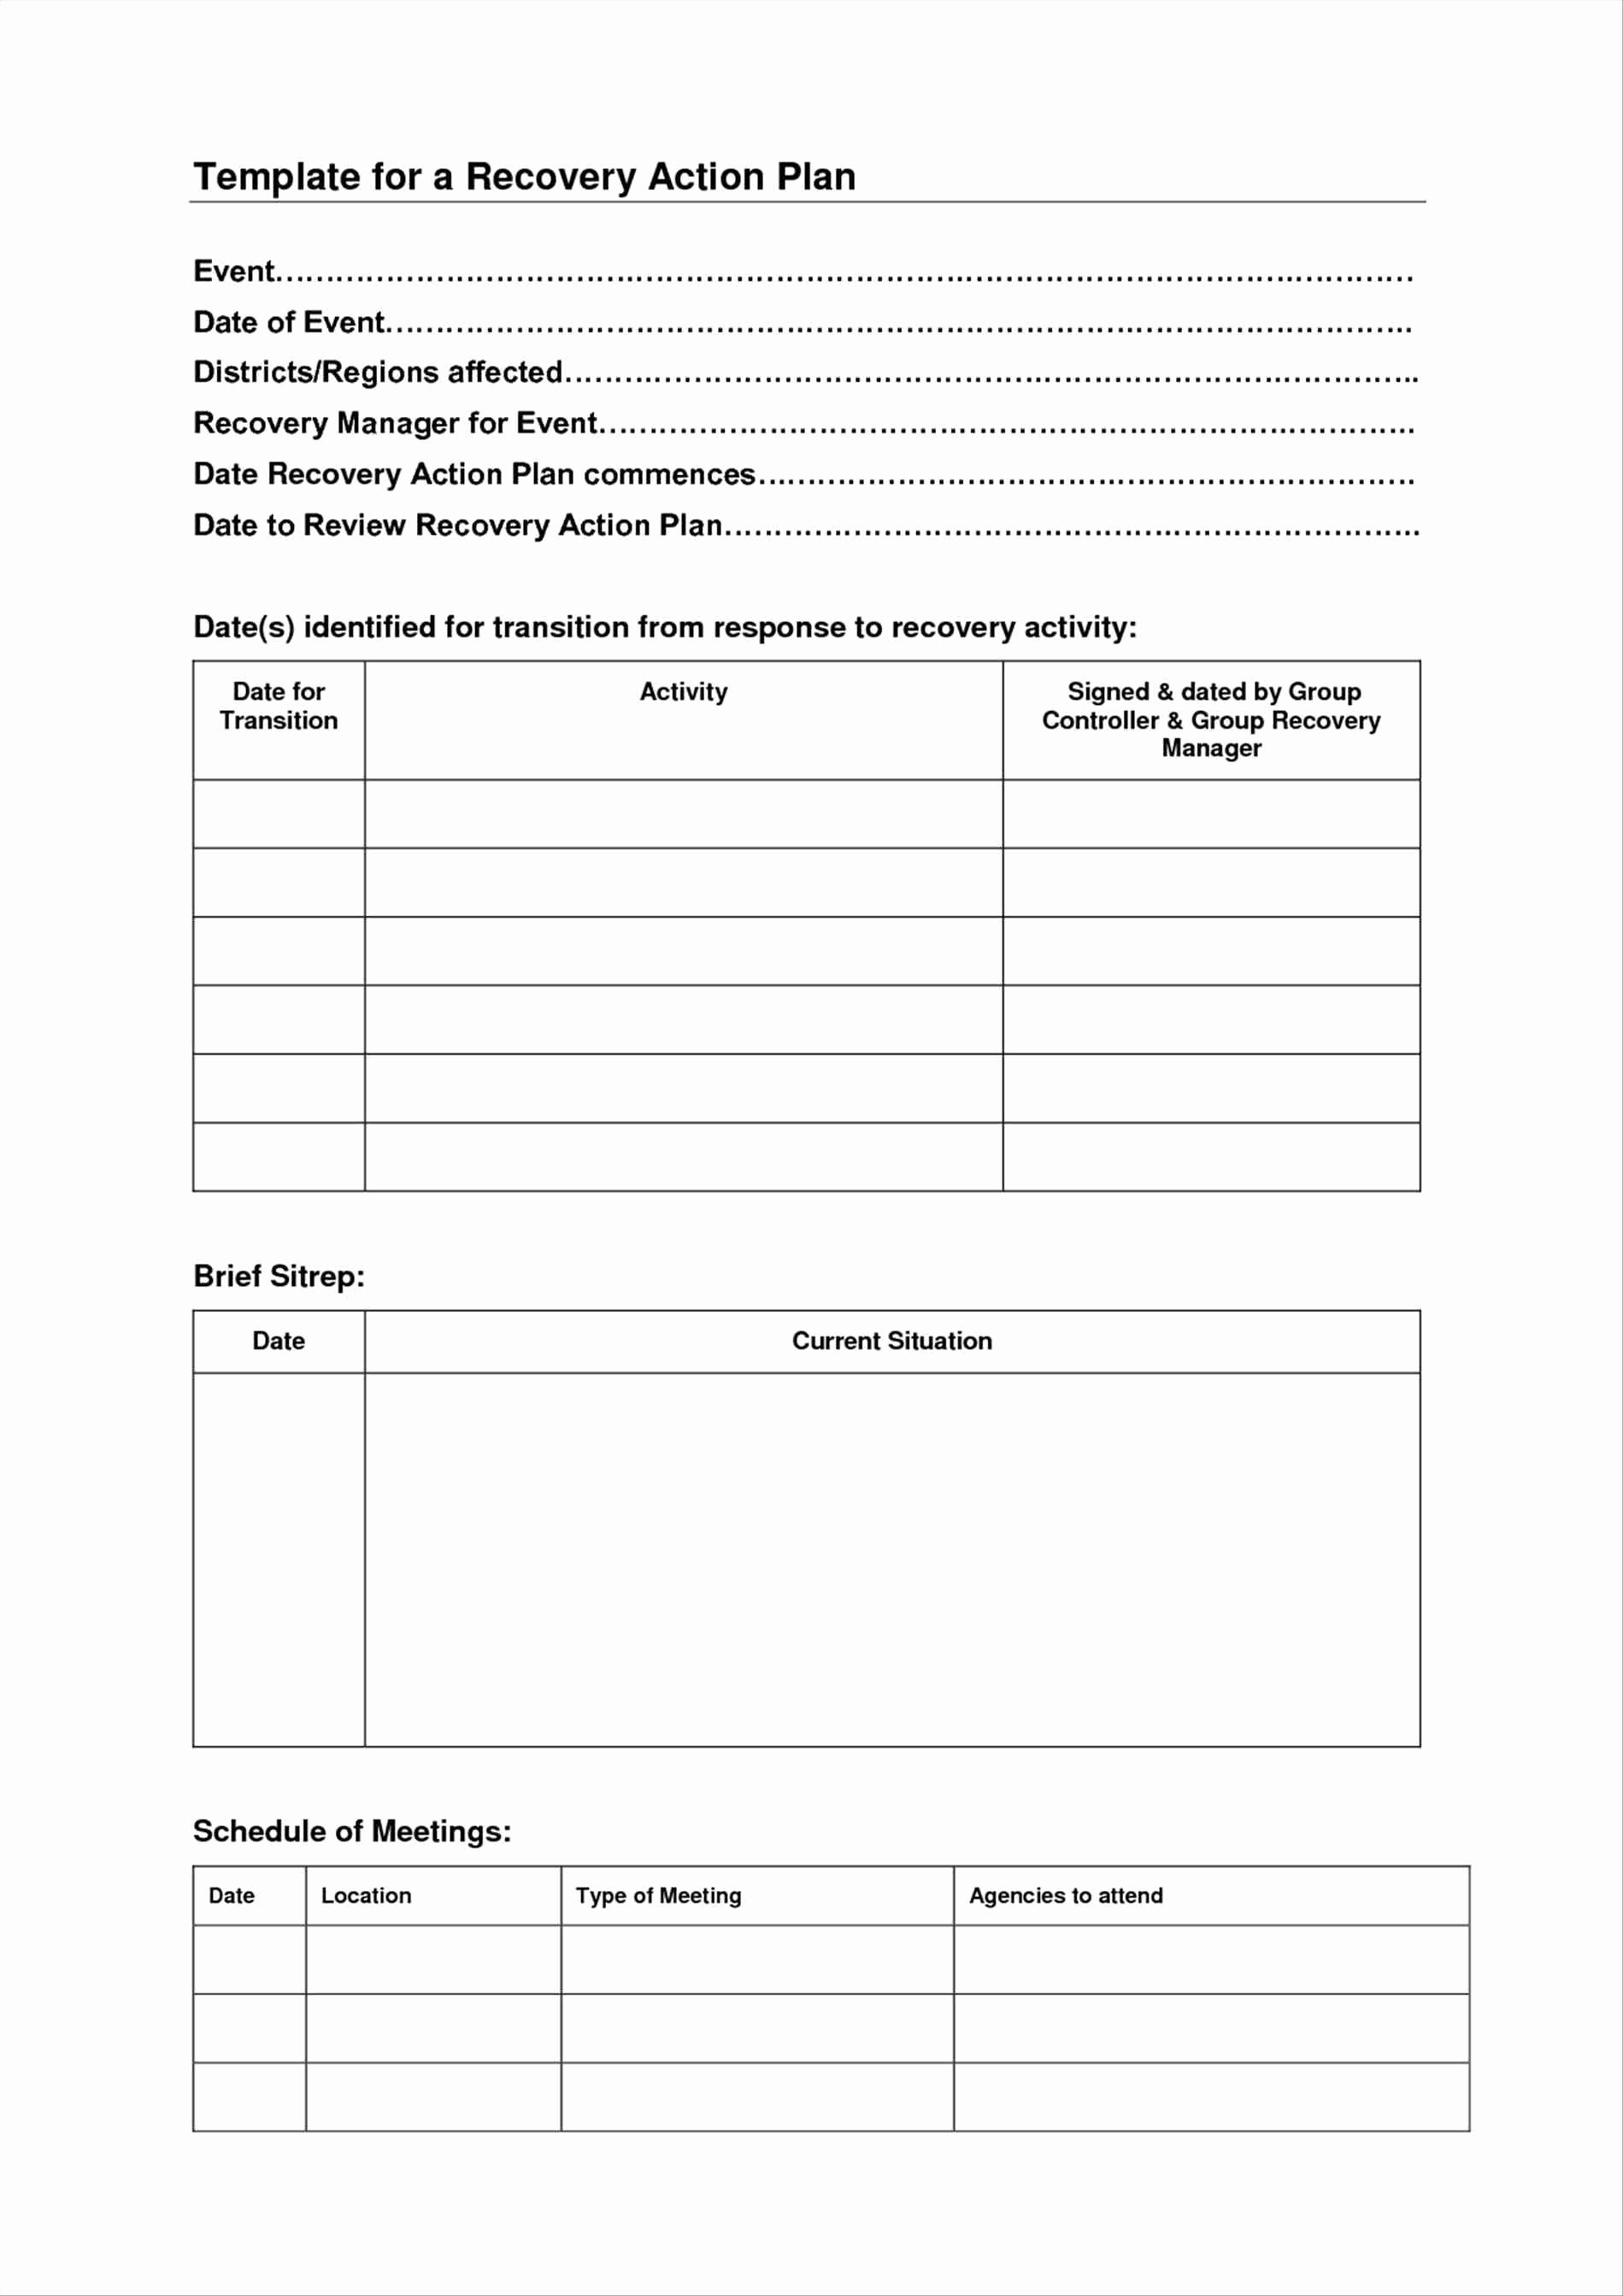 wellness-action-recovery-plan-fillable-form-printable-forms-free-online